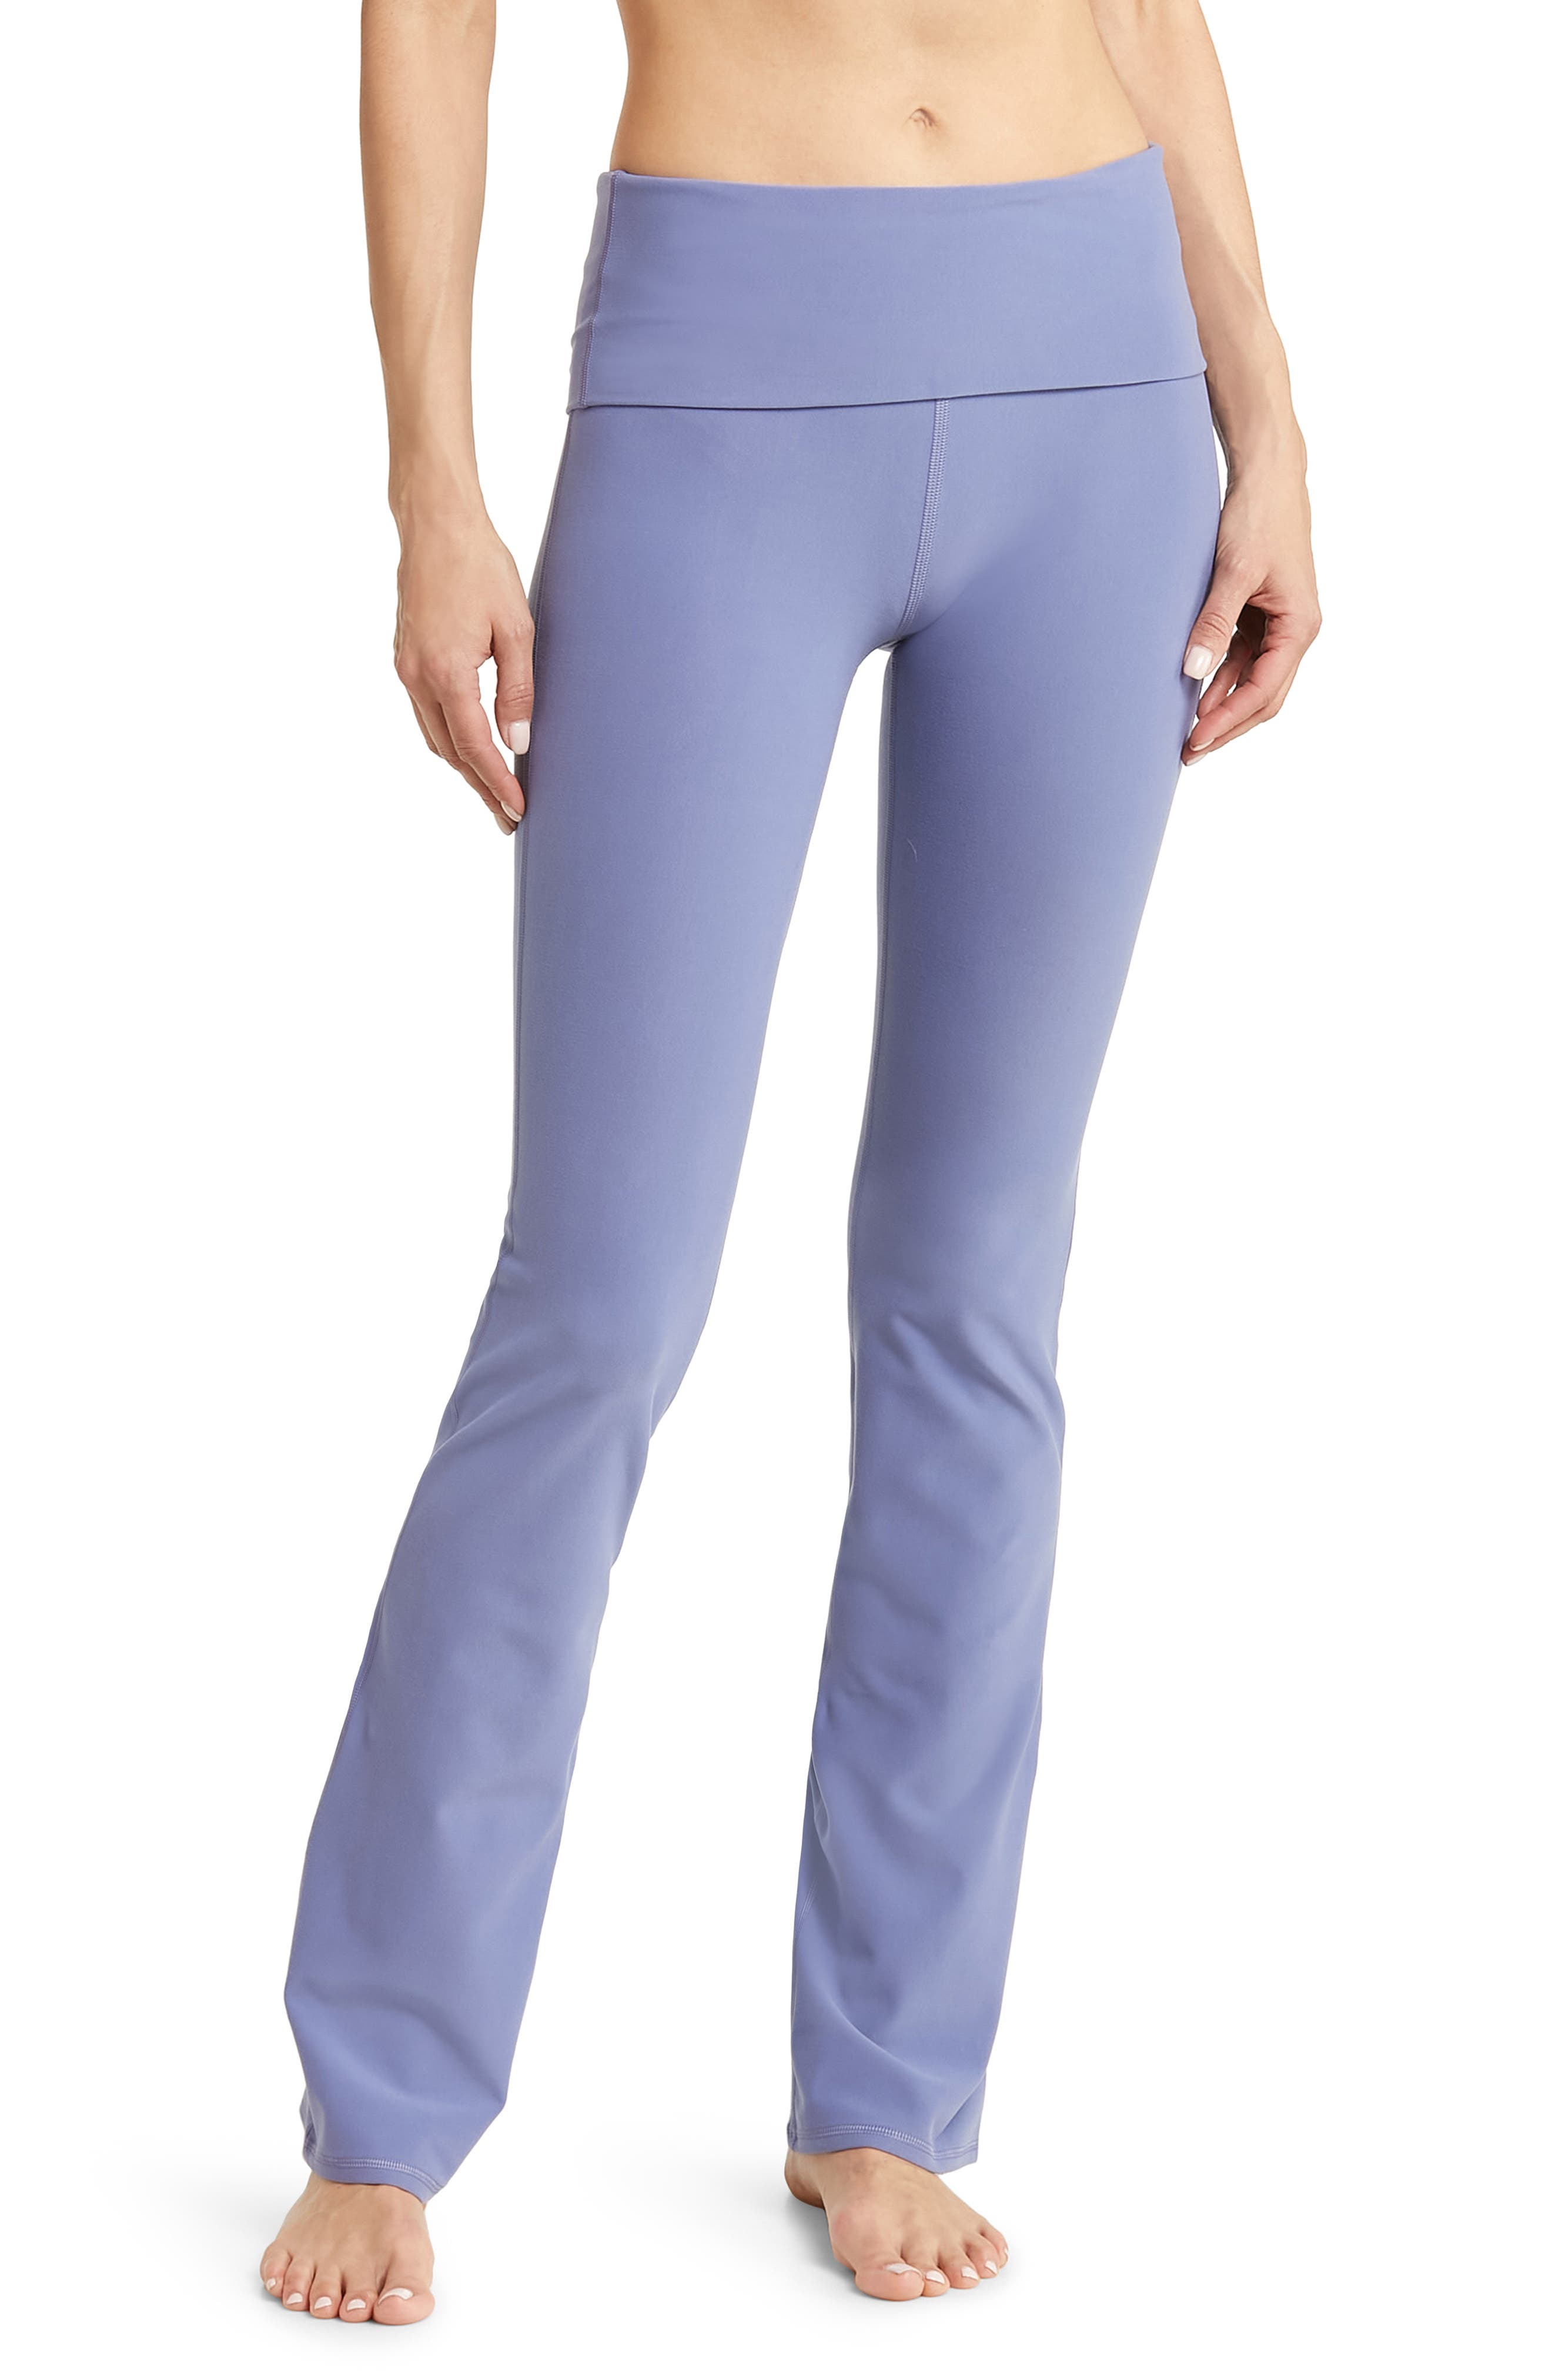 Airlift High-Waist Suit Up Legging - Lilac Blue/White. – Alo Yoga